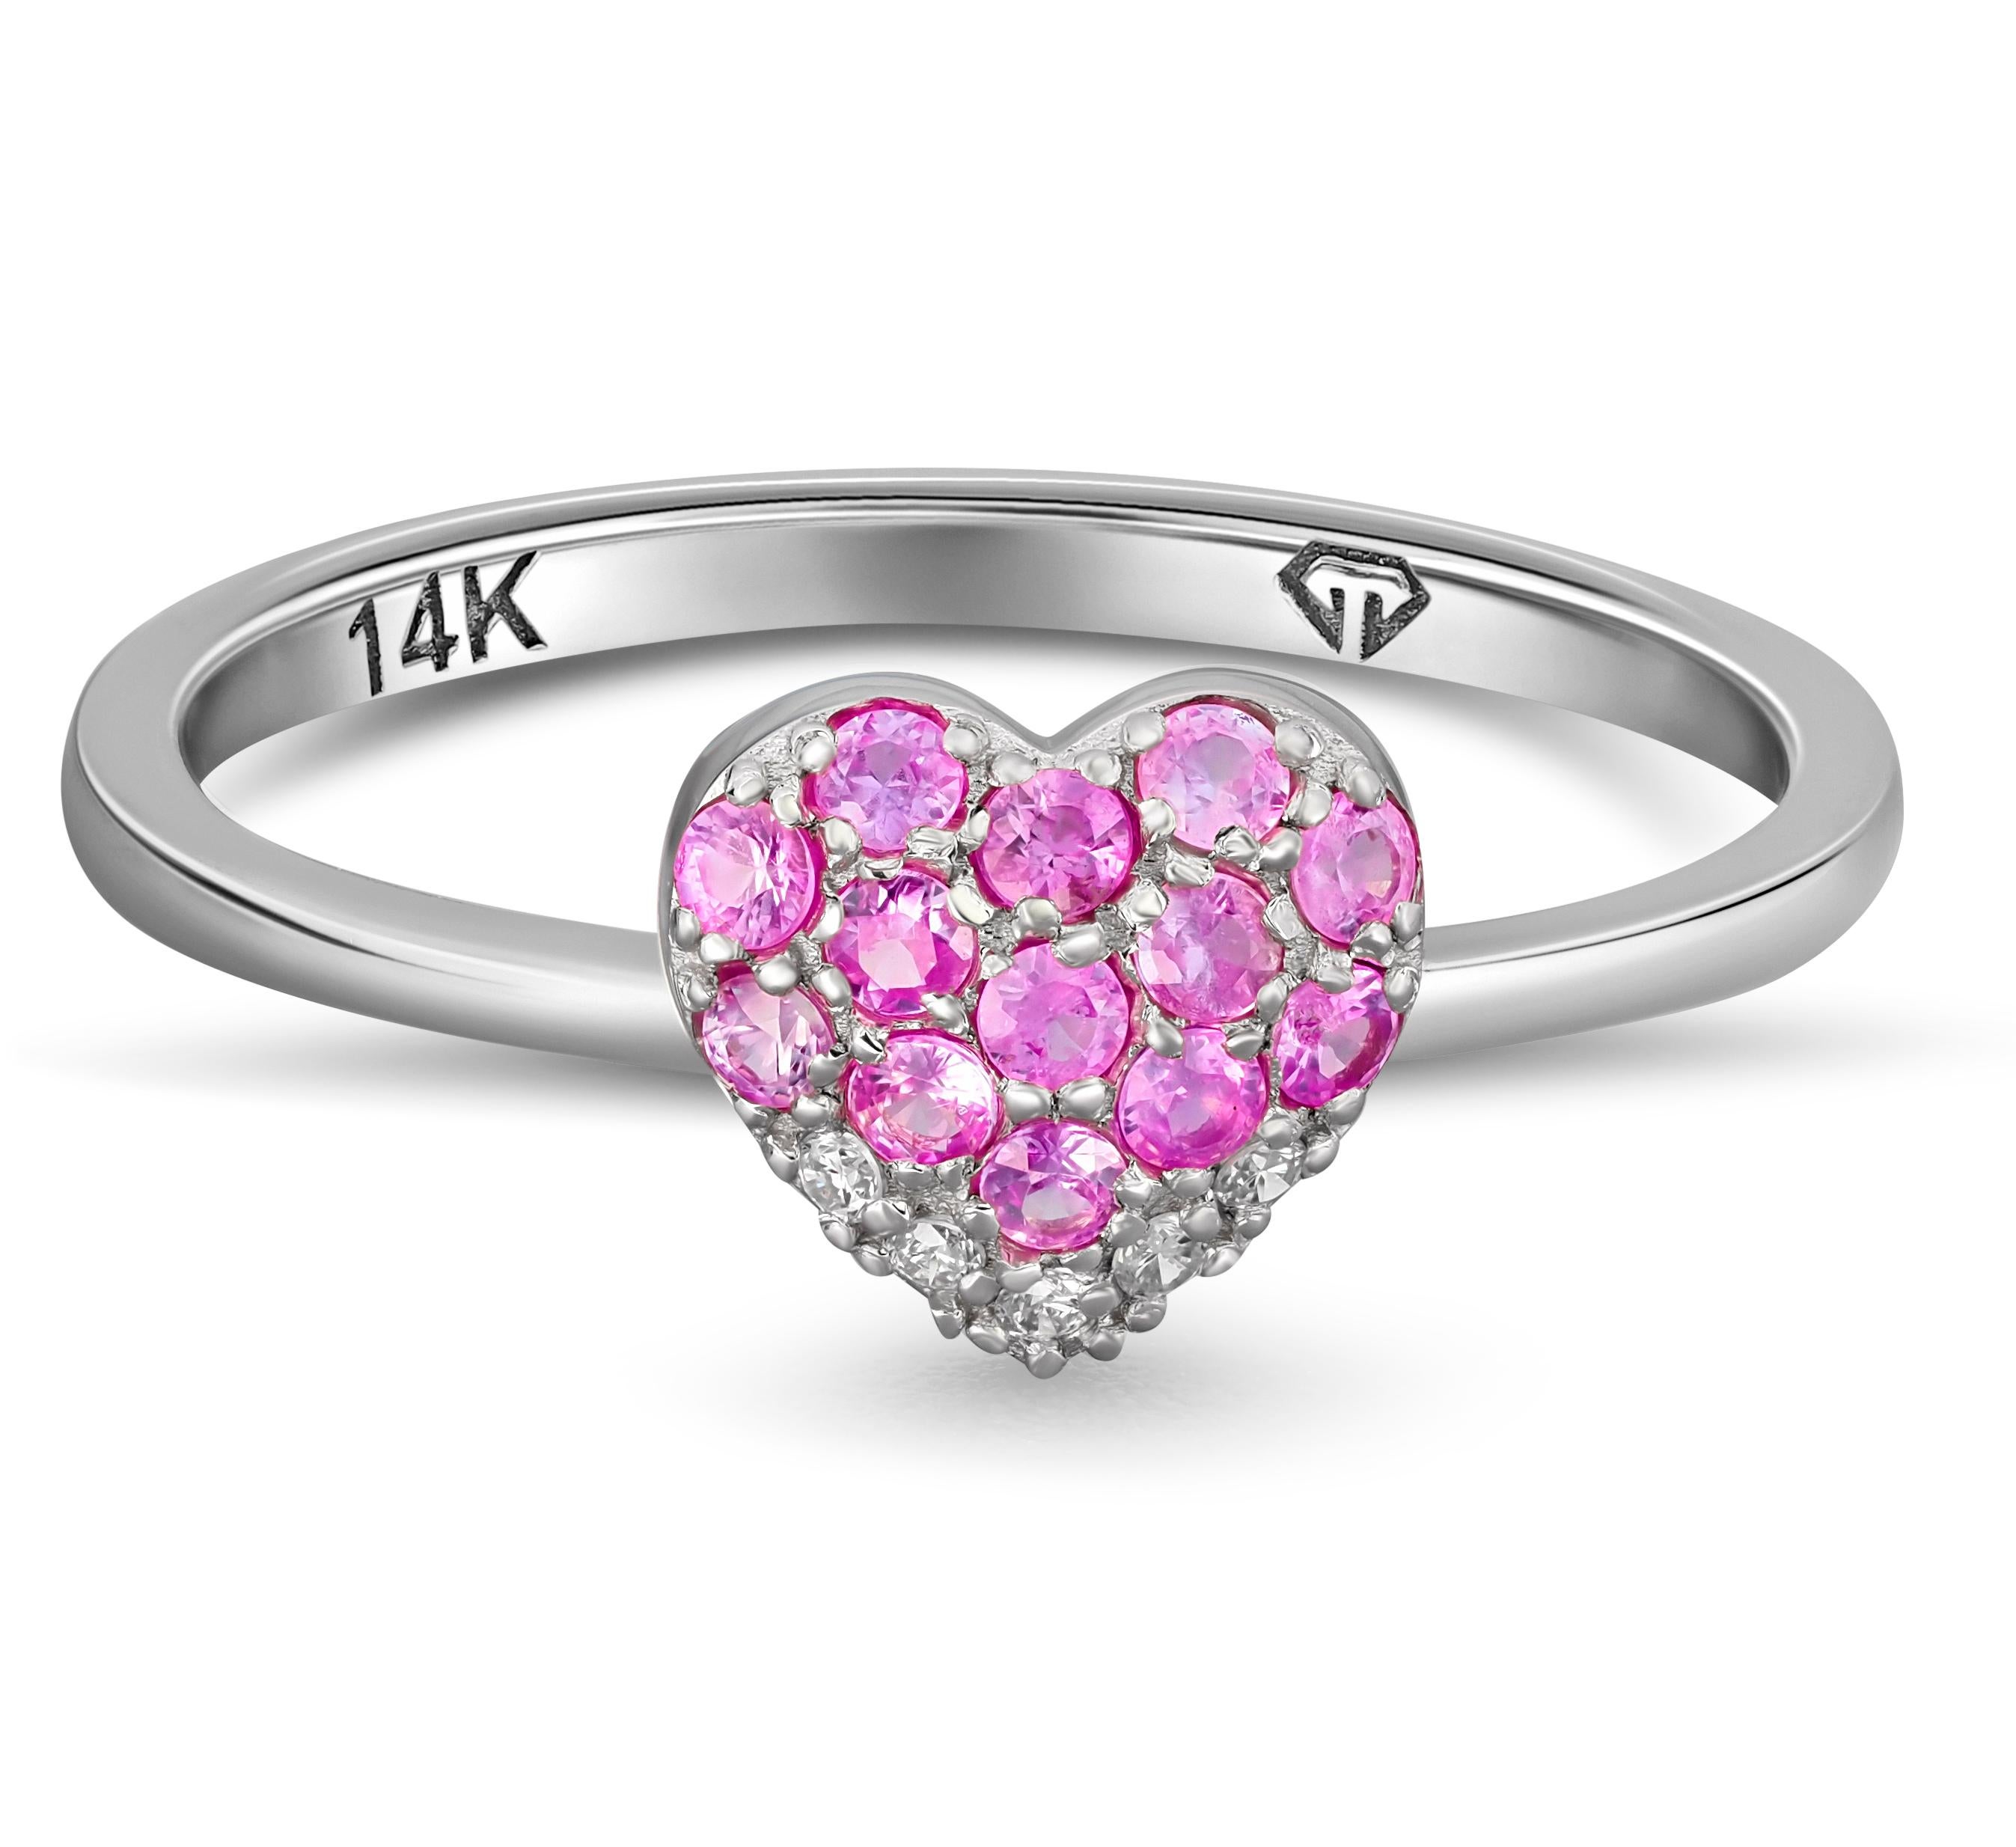 Heart shaped gold ring with pink sapphires. 
Natural pink heart sapphire ring. Round cut pink sapphire 14k gold ring.

Metal: 14k gold
Weight: 1.5 g. depends from size

Gemstones:
Sapphire: color - pink
Round cut, weight - approx 0.39 ct in total